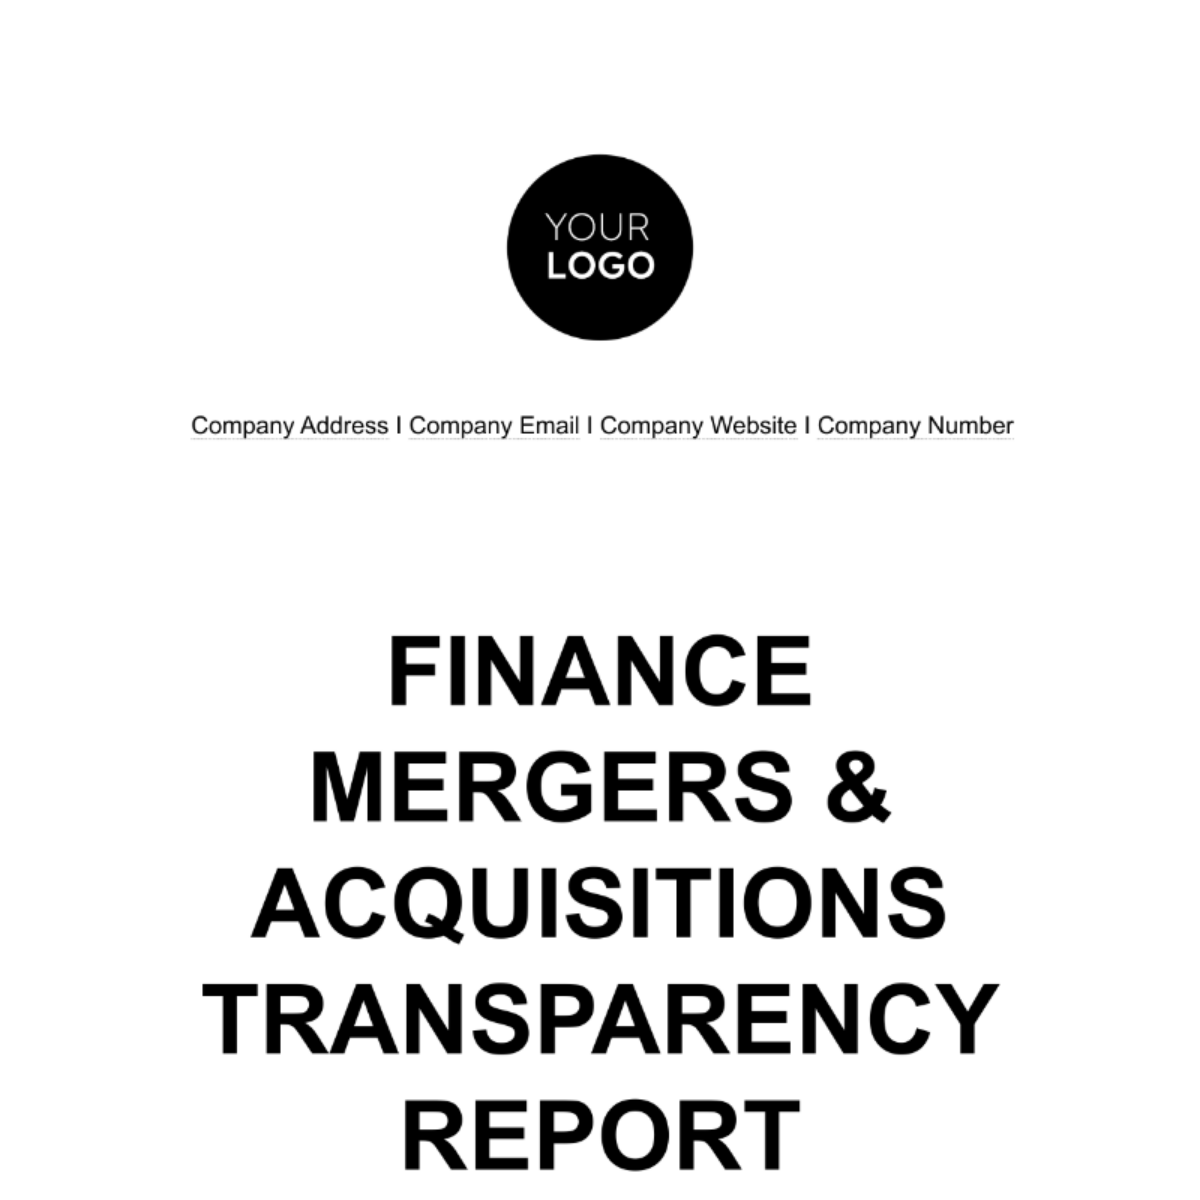 Free Finance Mergers & Acquisitions Transparency Report Template